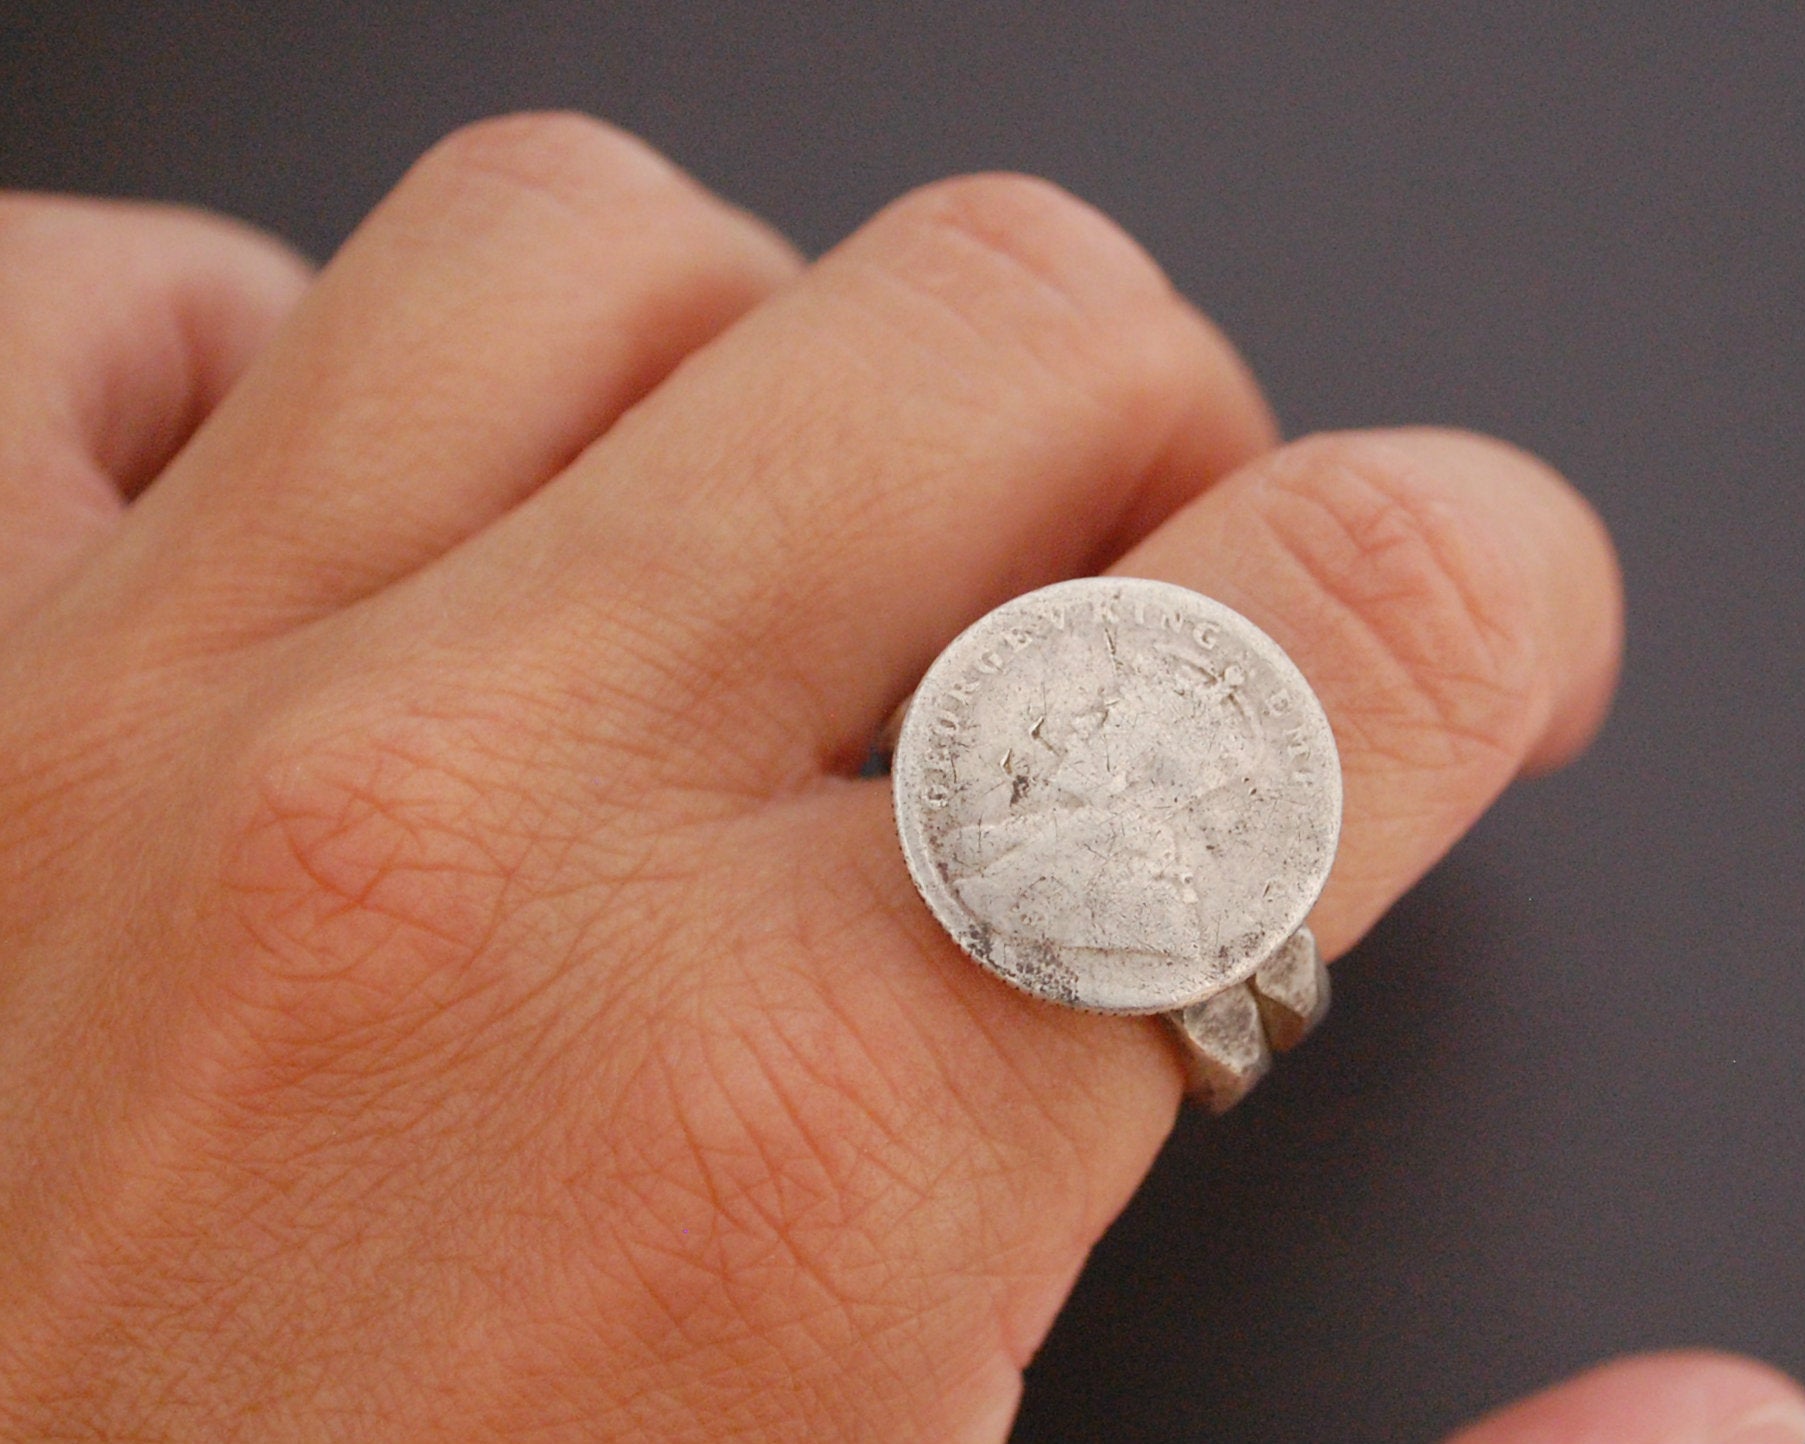 Old Indian Tribal Coin Ring with Double Band - Size 6.75